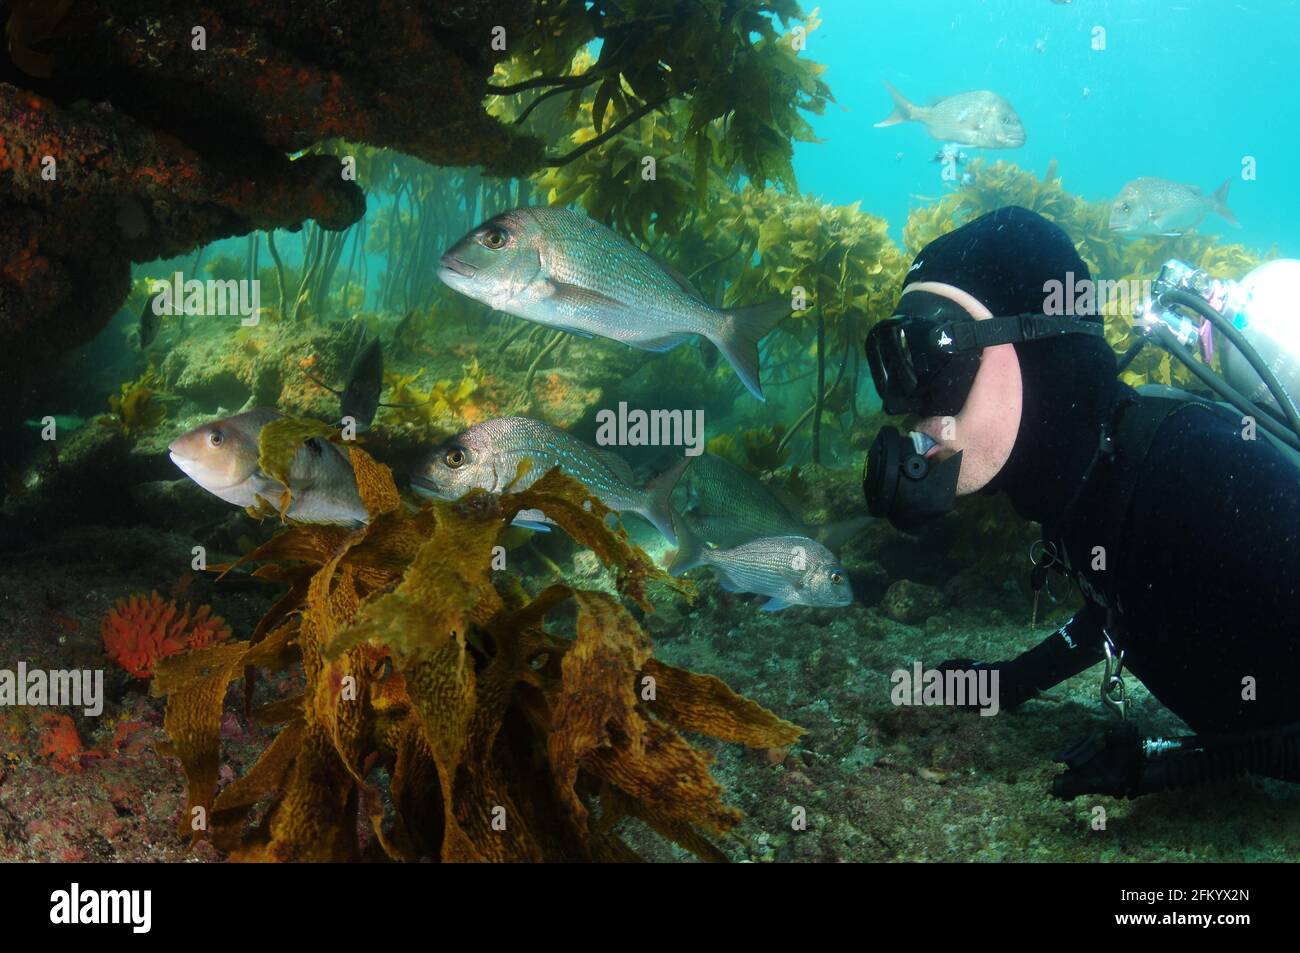 Scuba diver and silver snappers at reef overhang with orange sponges in shade and kelp forest in background. Stock Photo